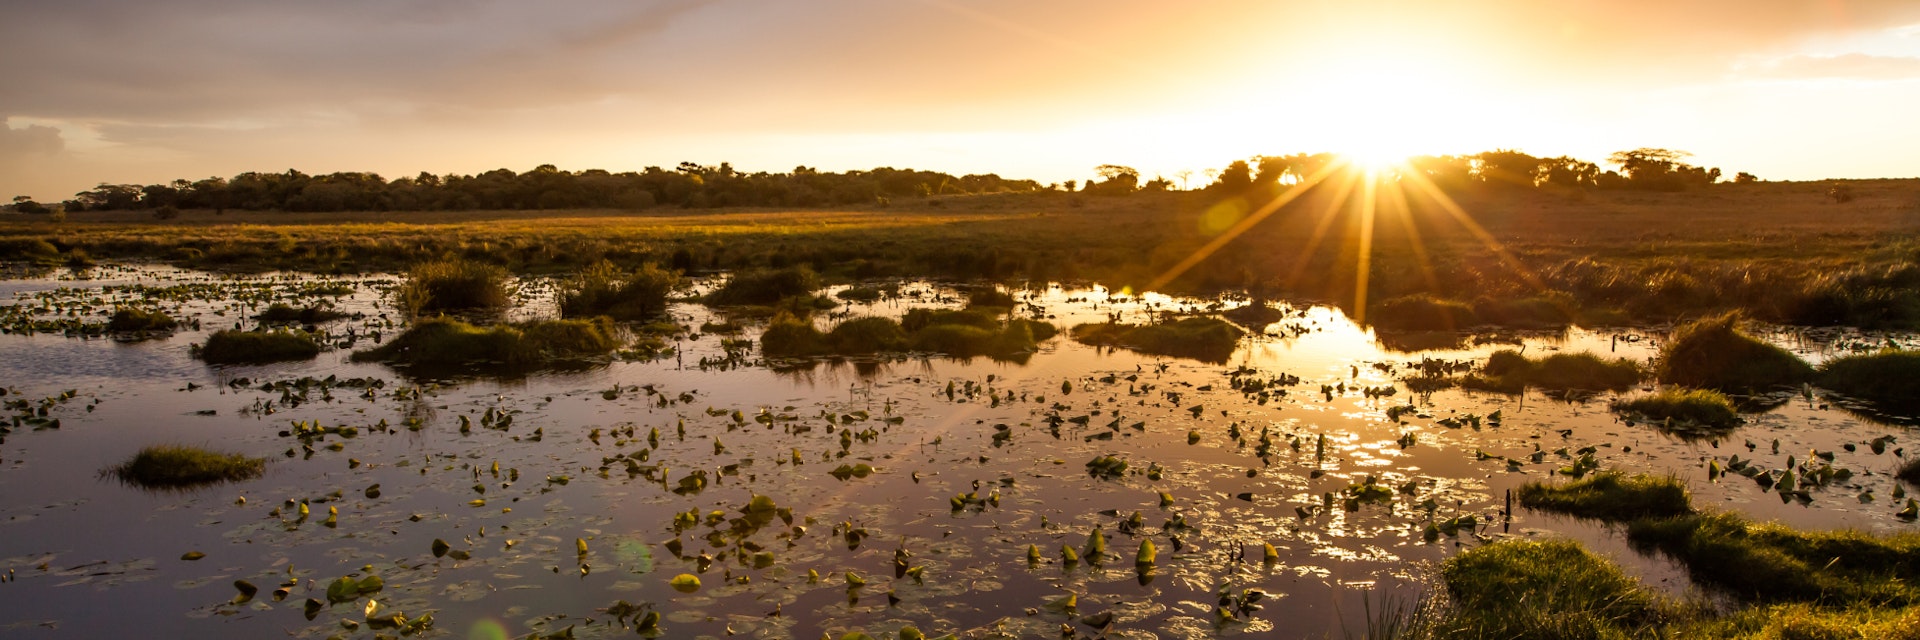 Sunset in the lake with water lilies, iSimangaliso Wetland Park; KwaZulu-Natal, South Africa.